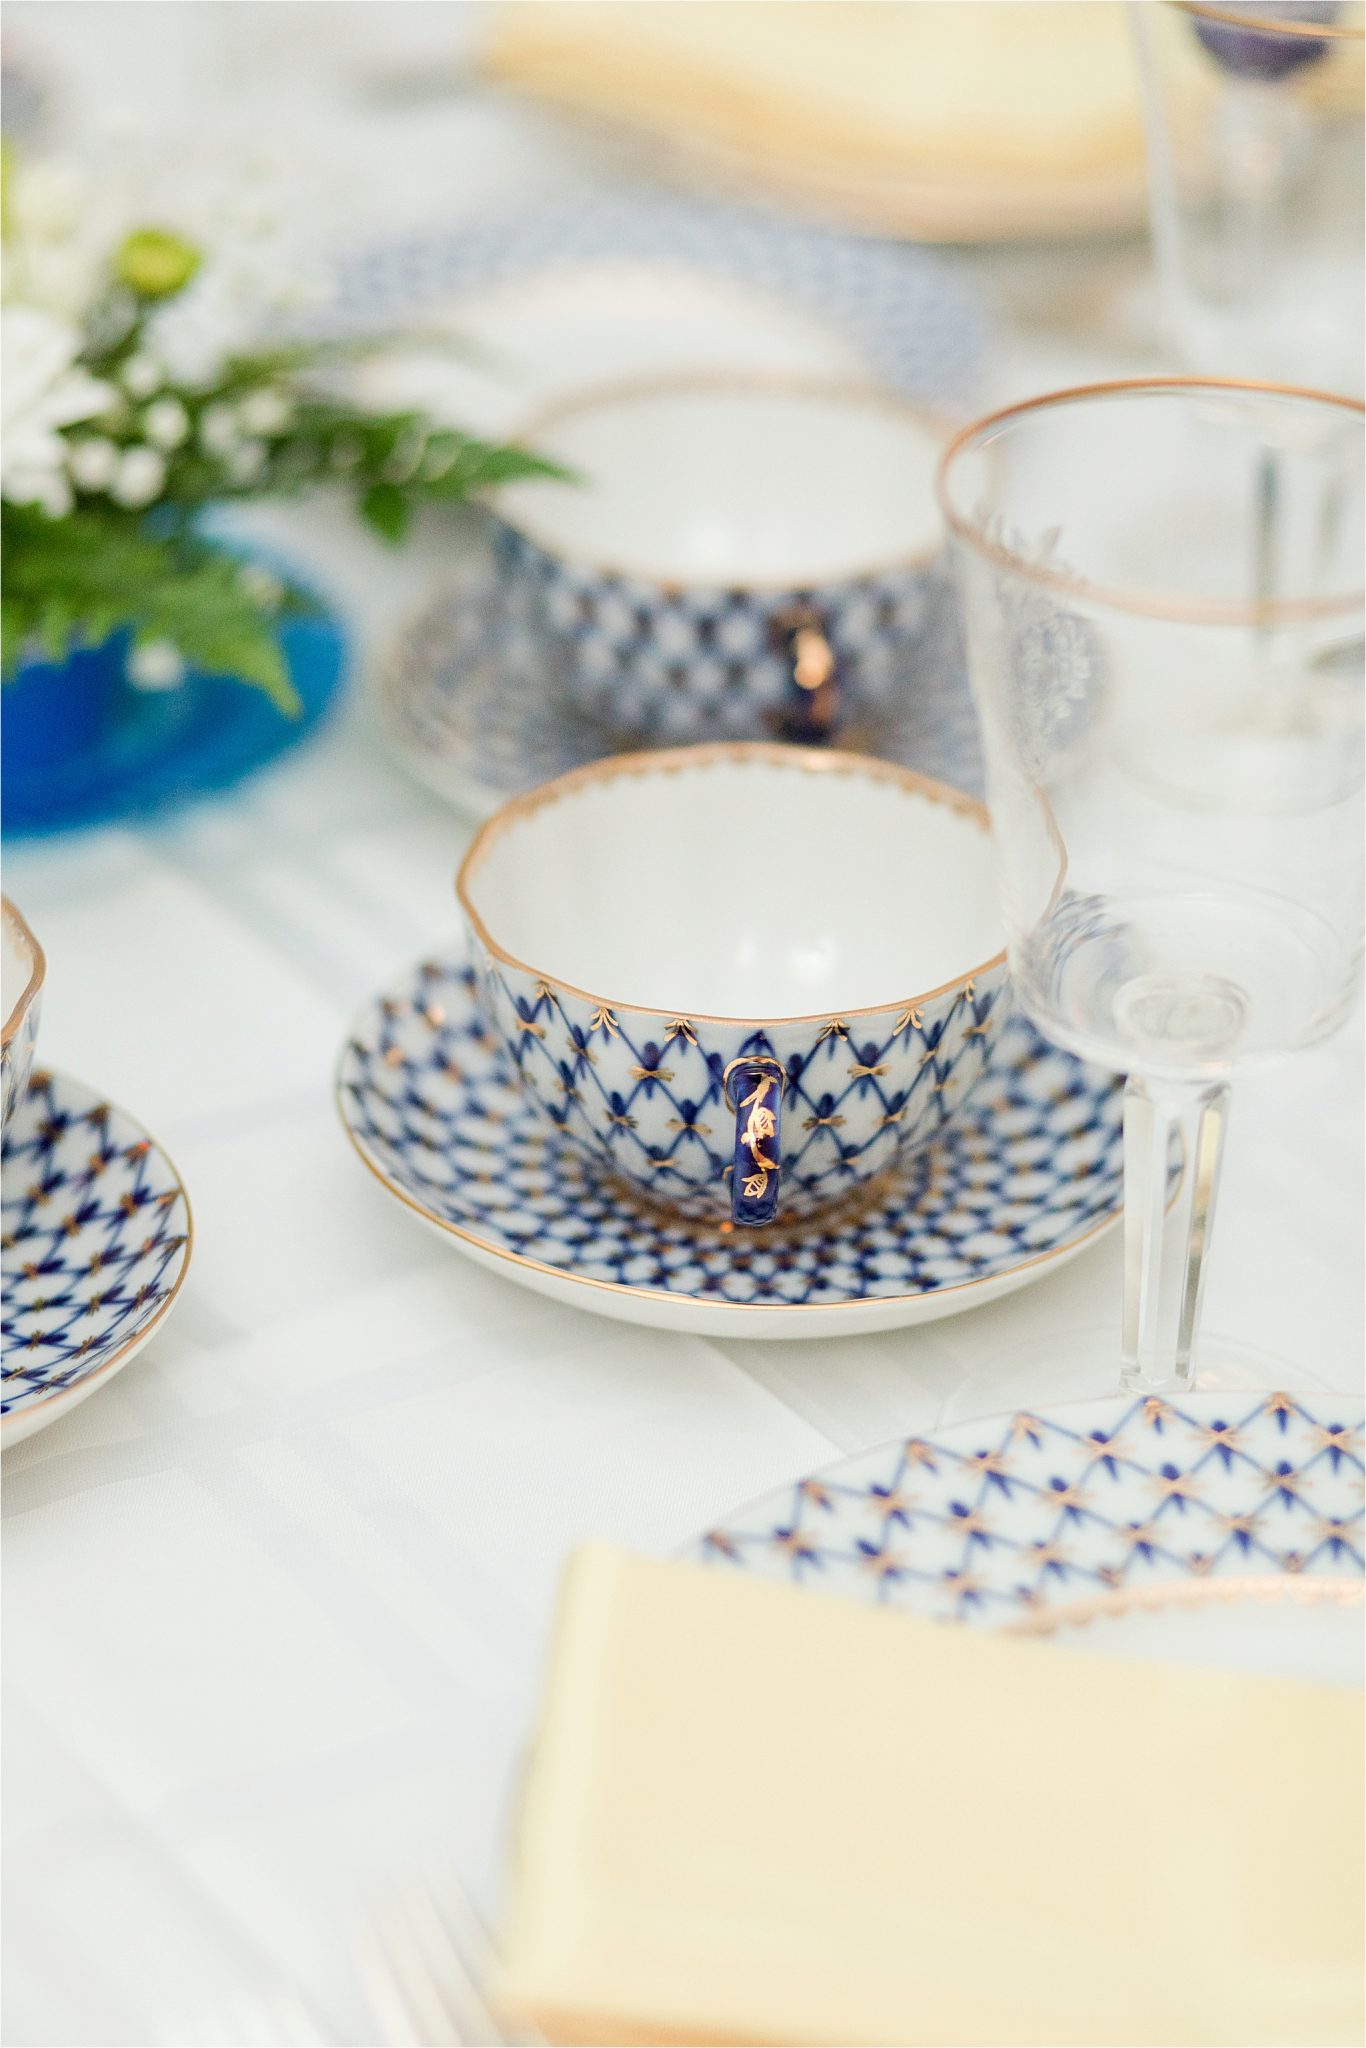 wedding china-formal place setting-navy blue china with rose gold detail-gold detail on rim-diamond patterned wedding china